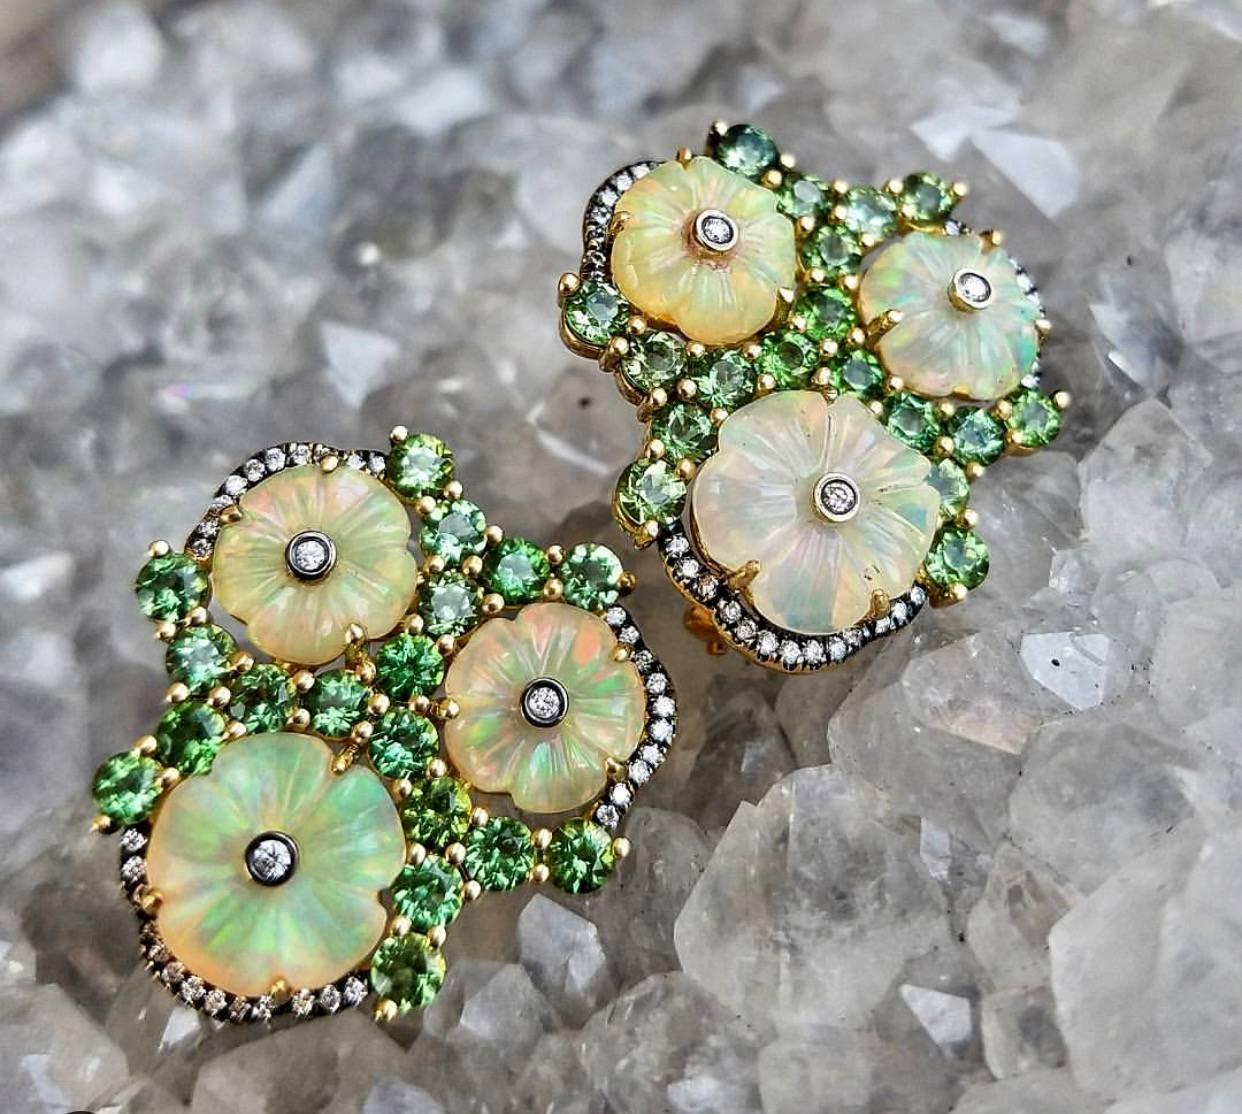 Exquisite Carved Opal Earrings are Romantic and feminine Work of Art, Inspired by past Jewels, Masterfully Carved Opal Flowers showing, Green, Orange , Yellow and Red Color Flashes, Looking Magical Surrounded by Mint Green Garnets and Colorless